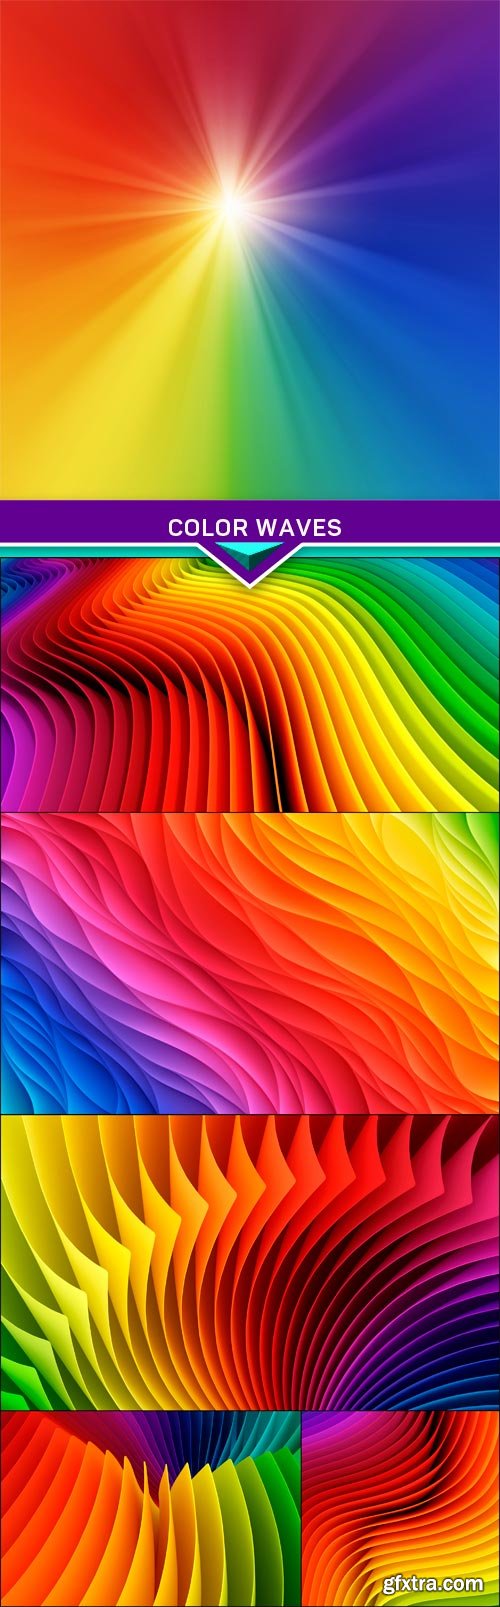 Color waves Abstract background 6x JPEG